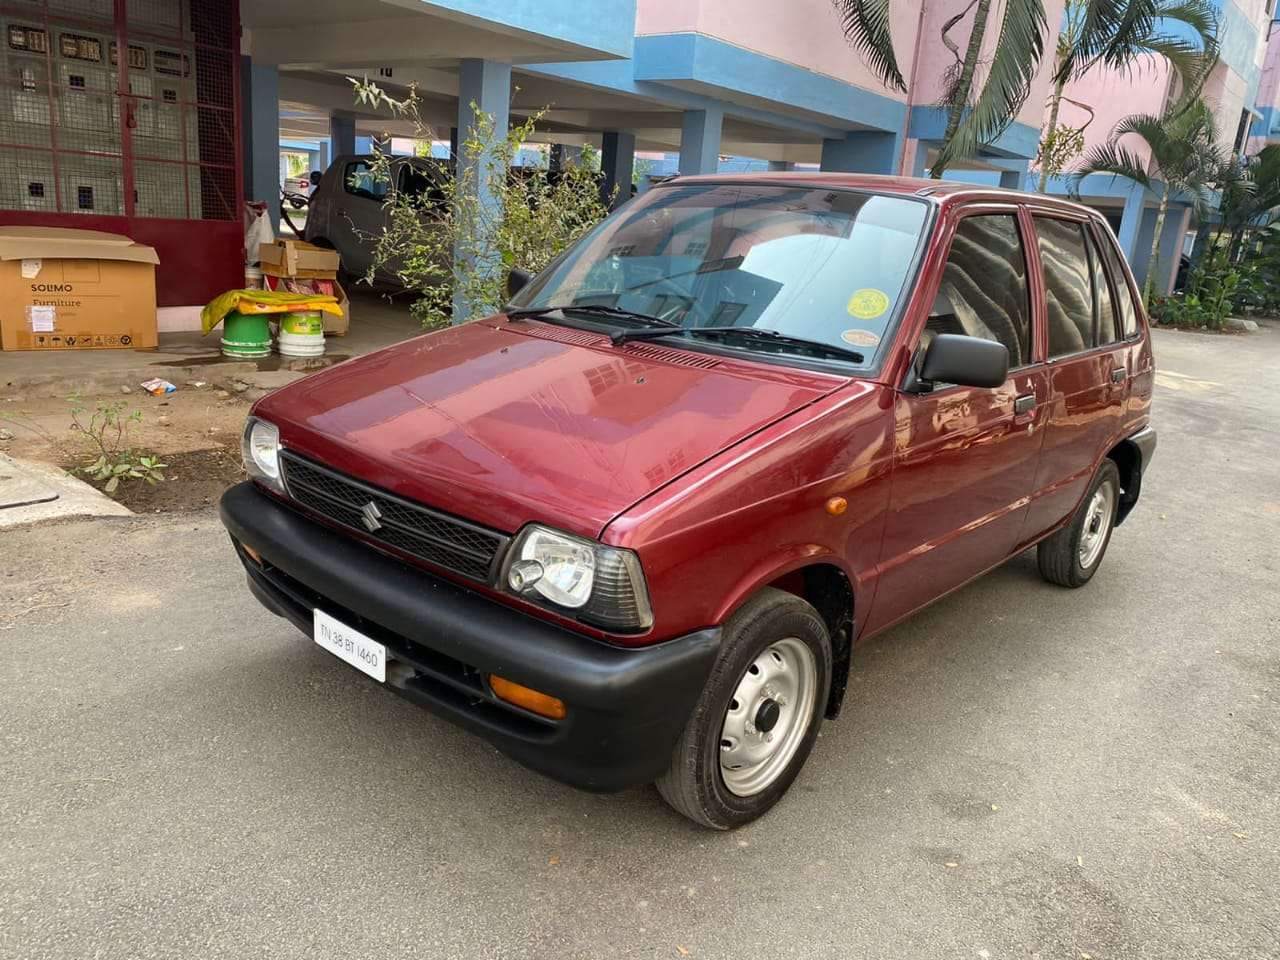 2927-for-sale-Maruthi-Suzuki-800-Petrol-First-Owner-2013-TN-registered-rs-195000